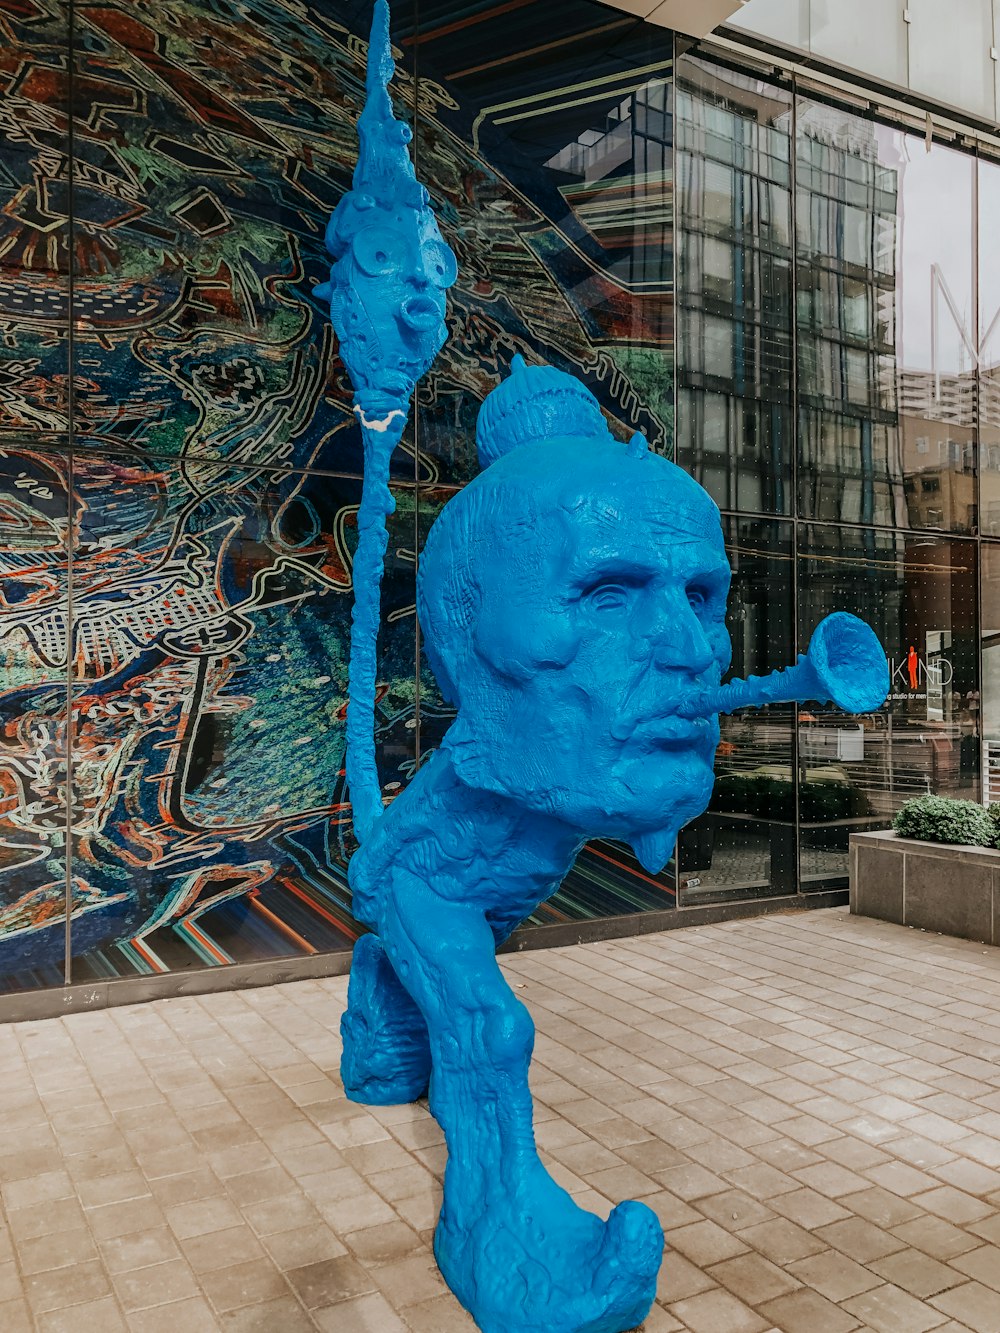 a blue sculpture of a man holding a stick in front of a building